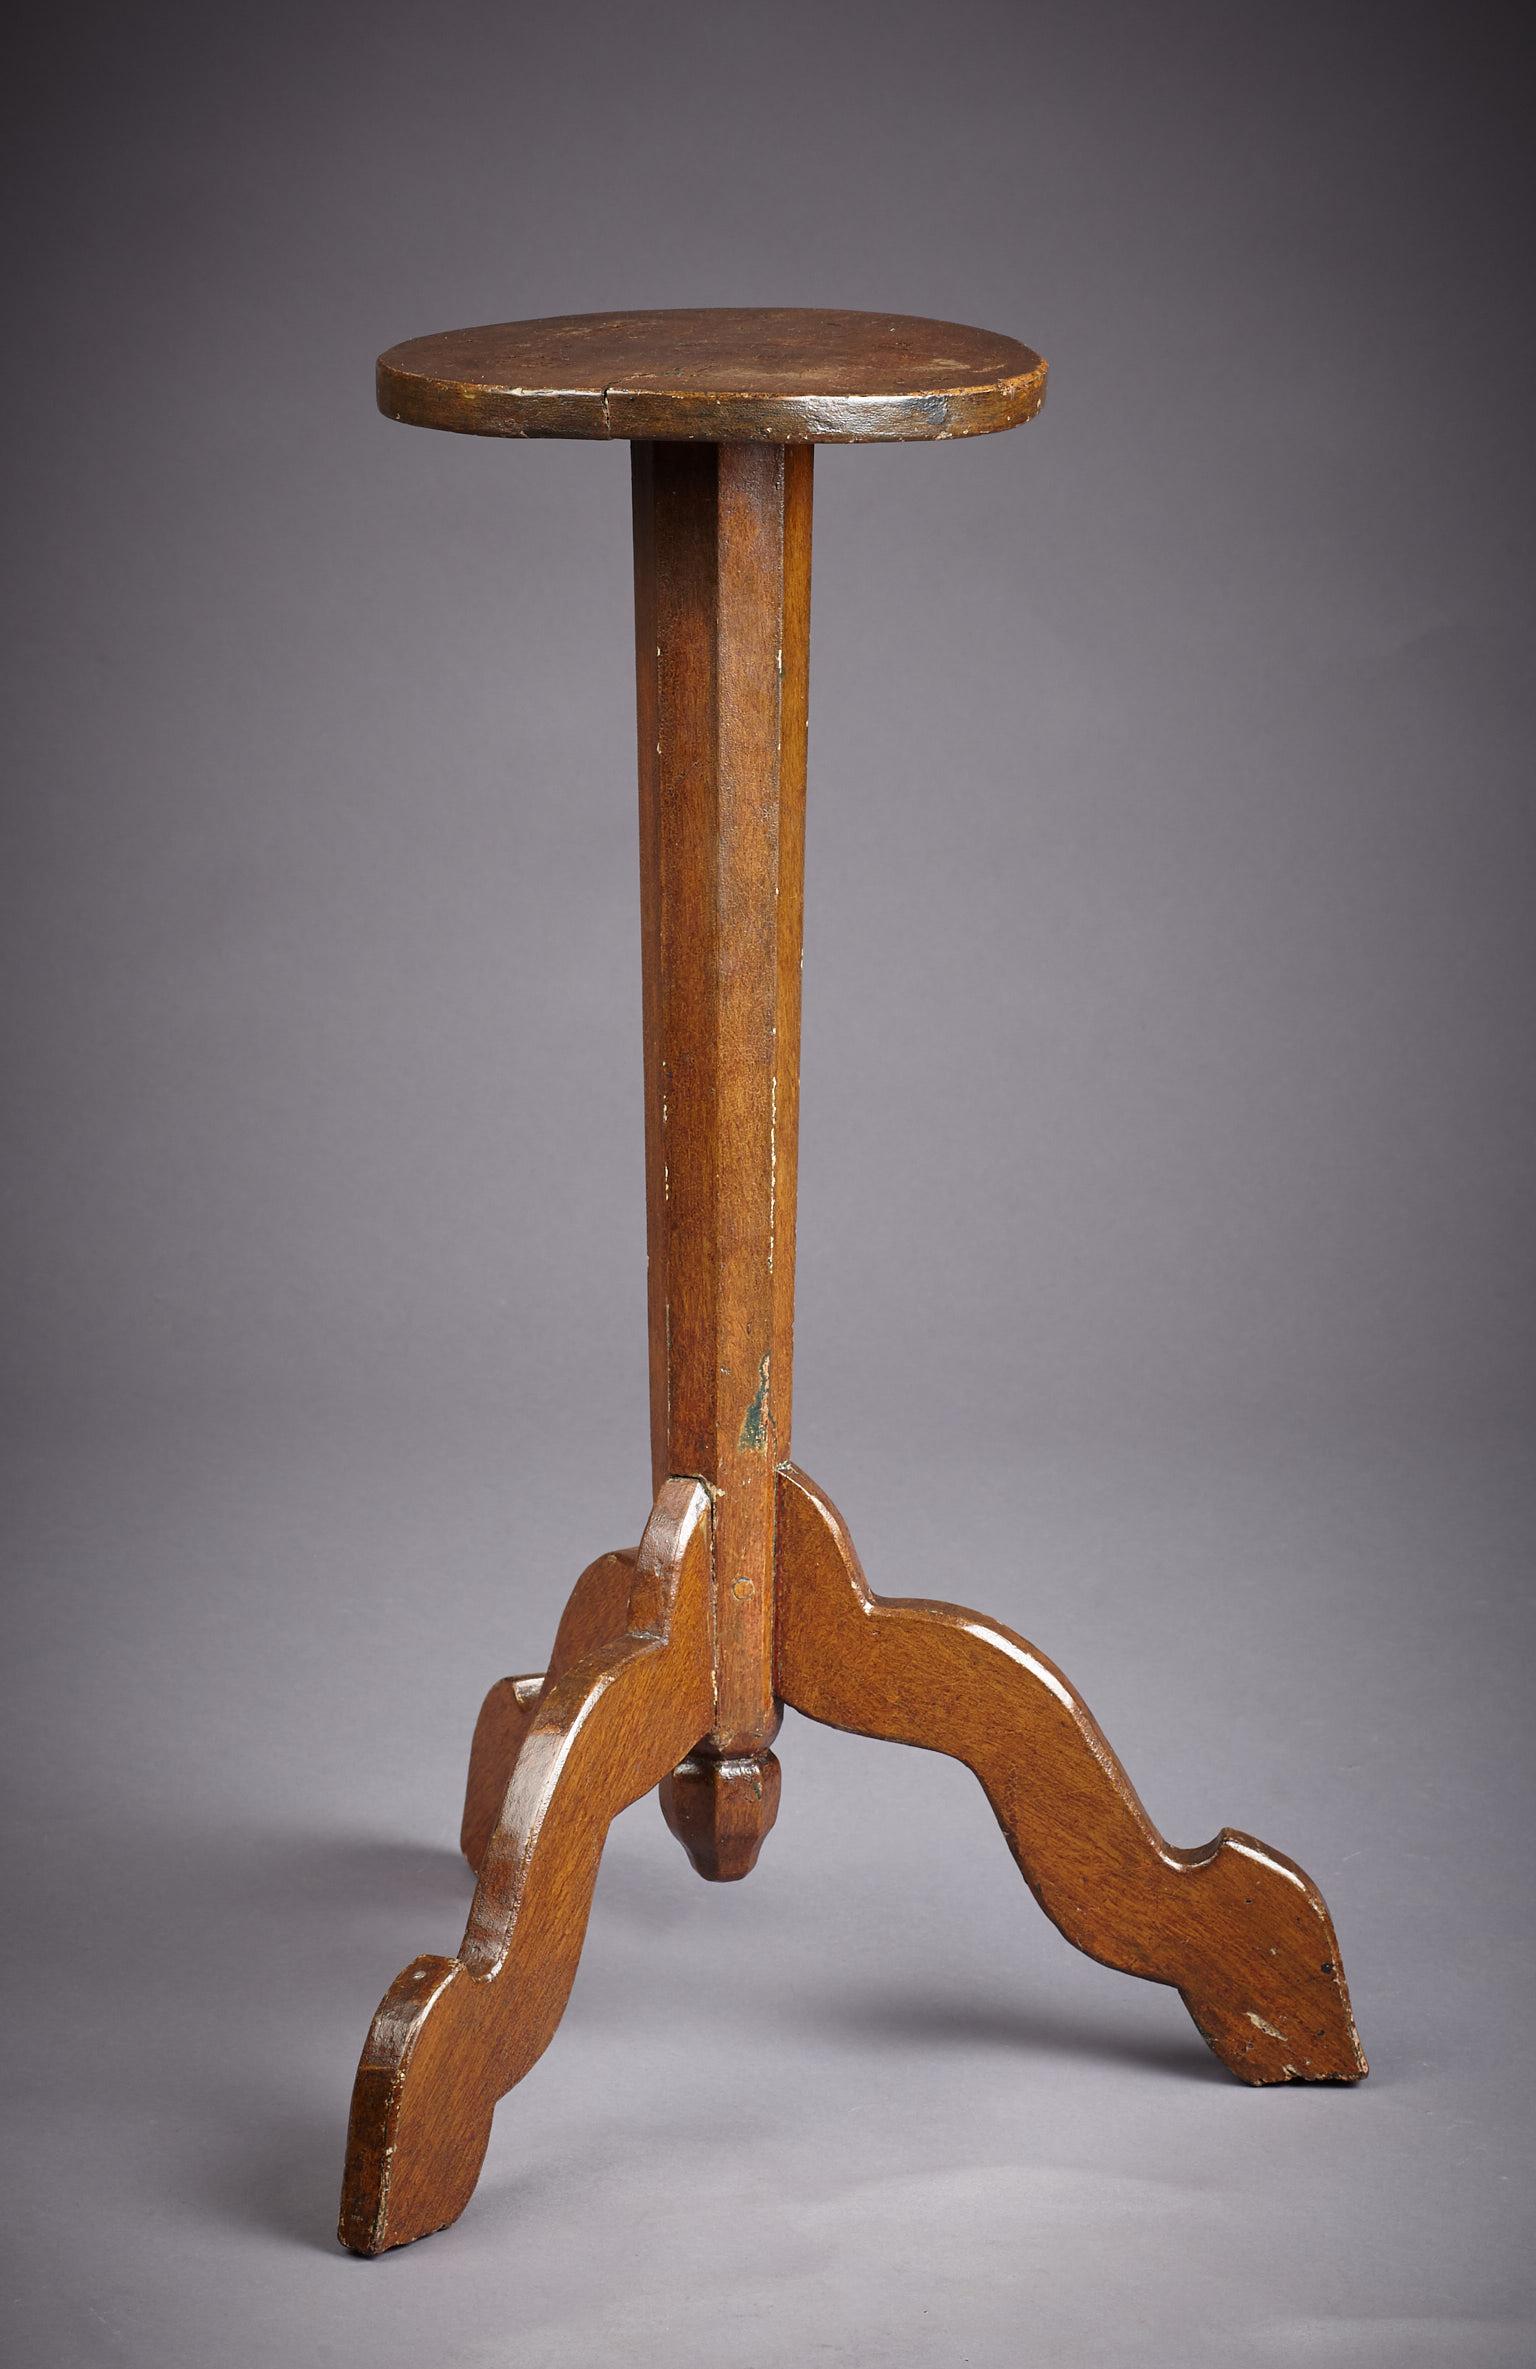 Painted Oak Candle-Stand, Early 18th Century, Queen Anne, England, circa 1710 im Angebot 5